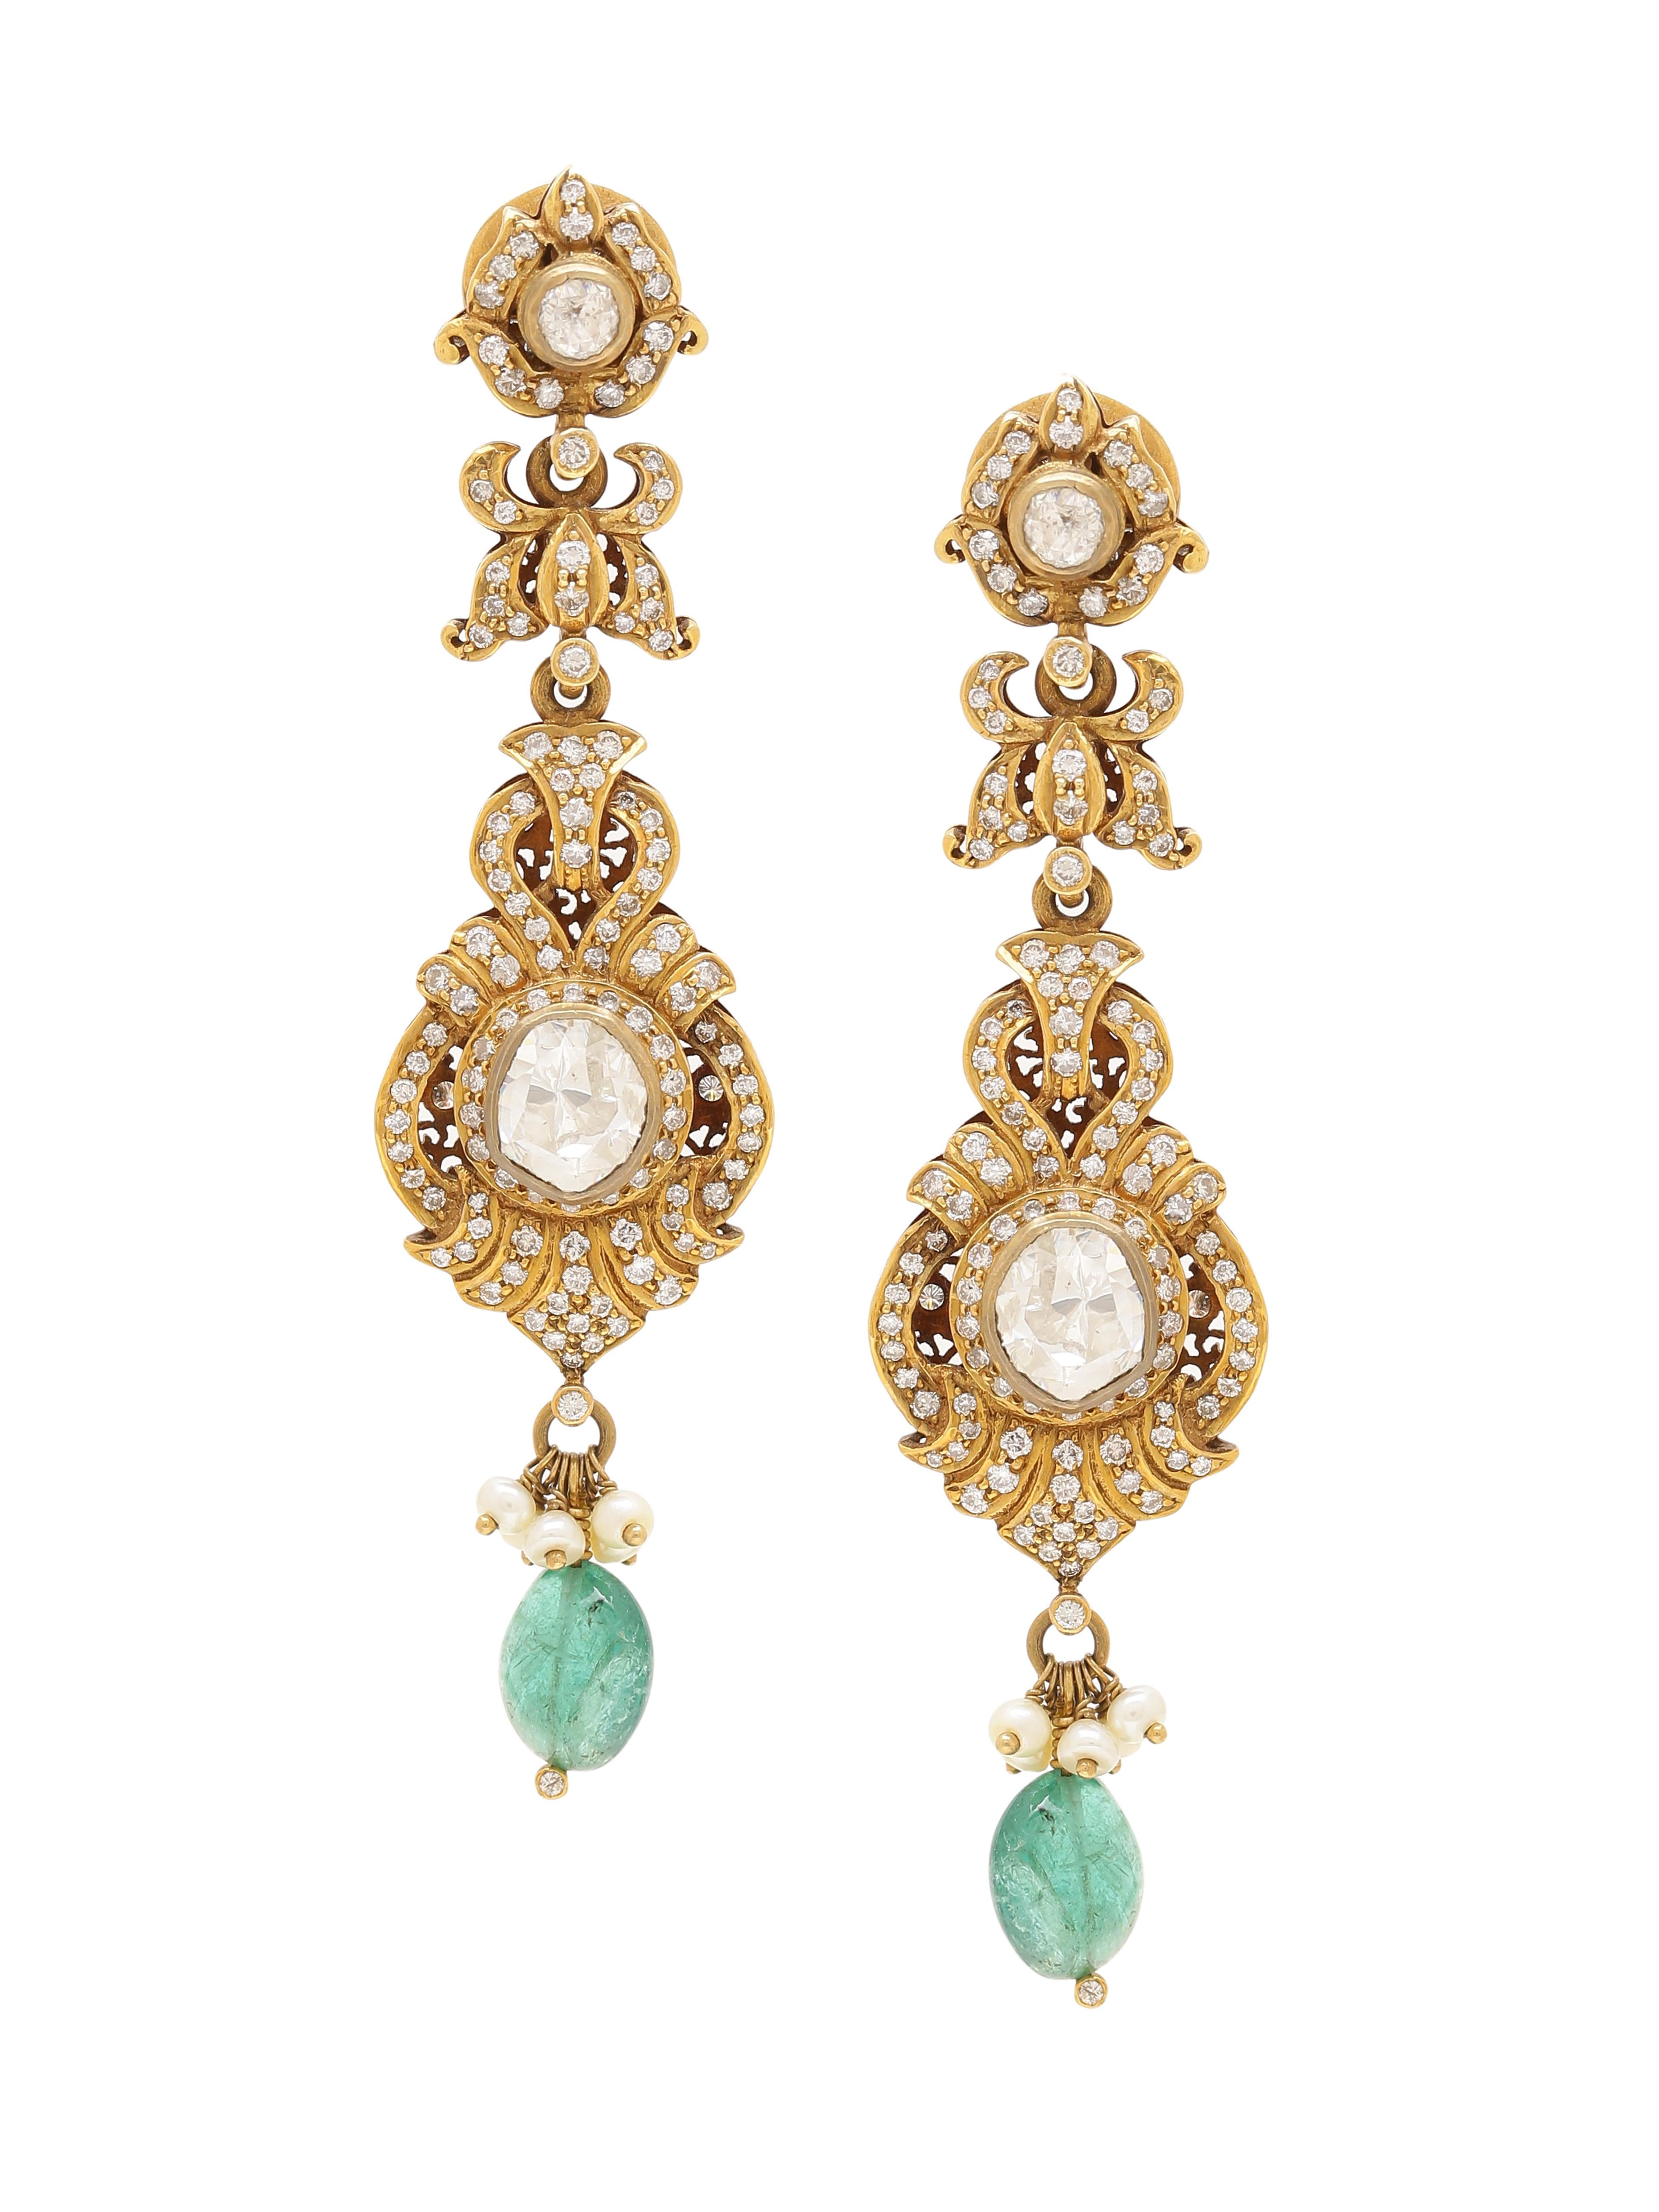 Art Deco Earring with Diamonds, Pearls and Emeralds Handcrafted in 18 Karat Yellow Gold For Sale